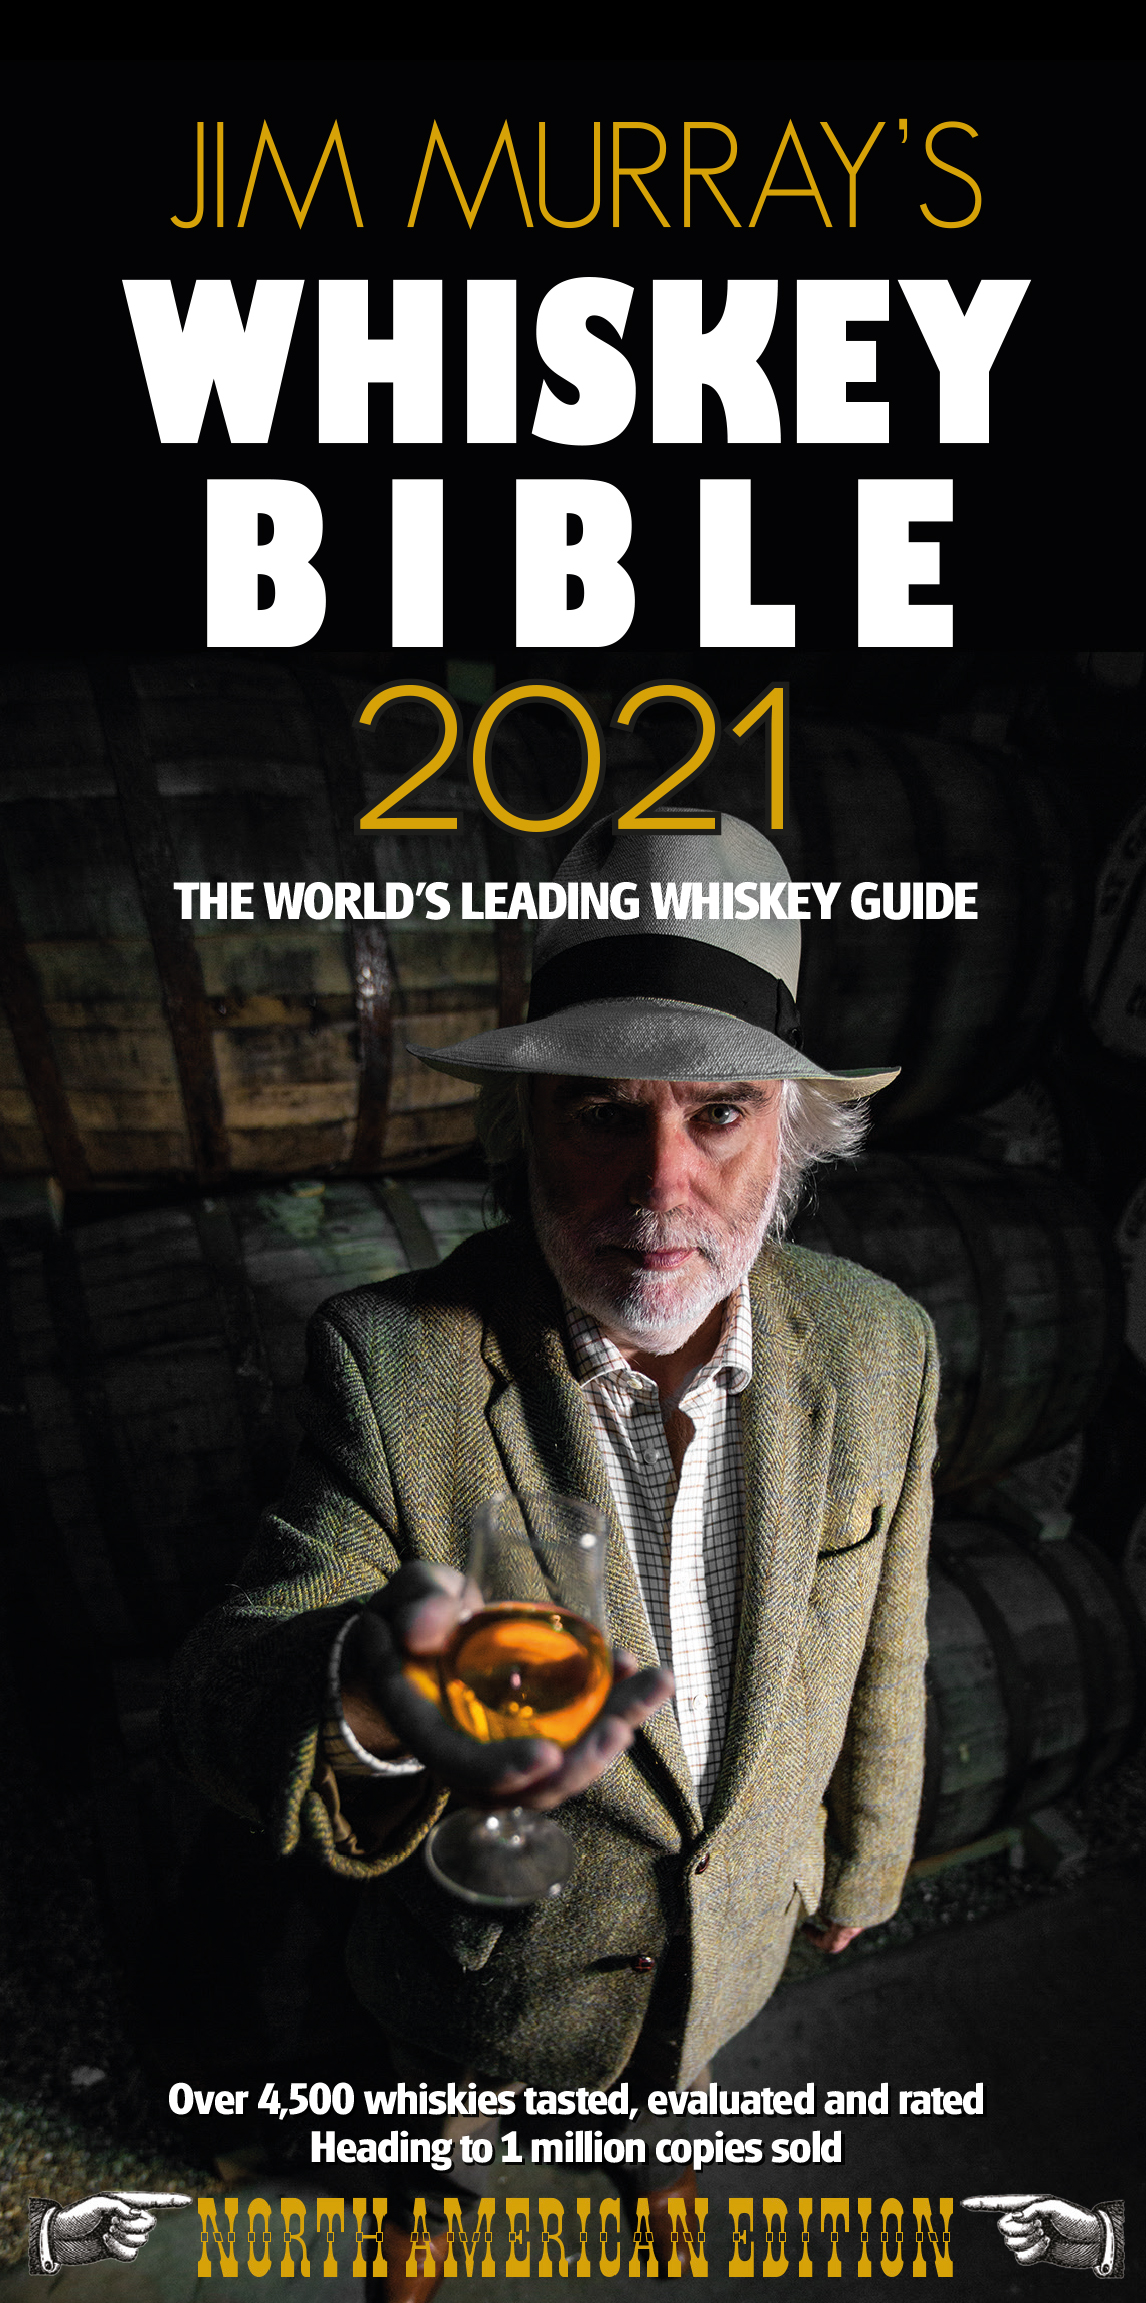 Jim Murray's Whiskey Bible 2021 North American Edition Whiskey Guide